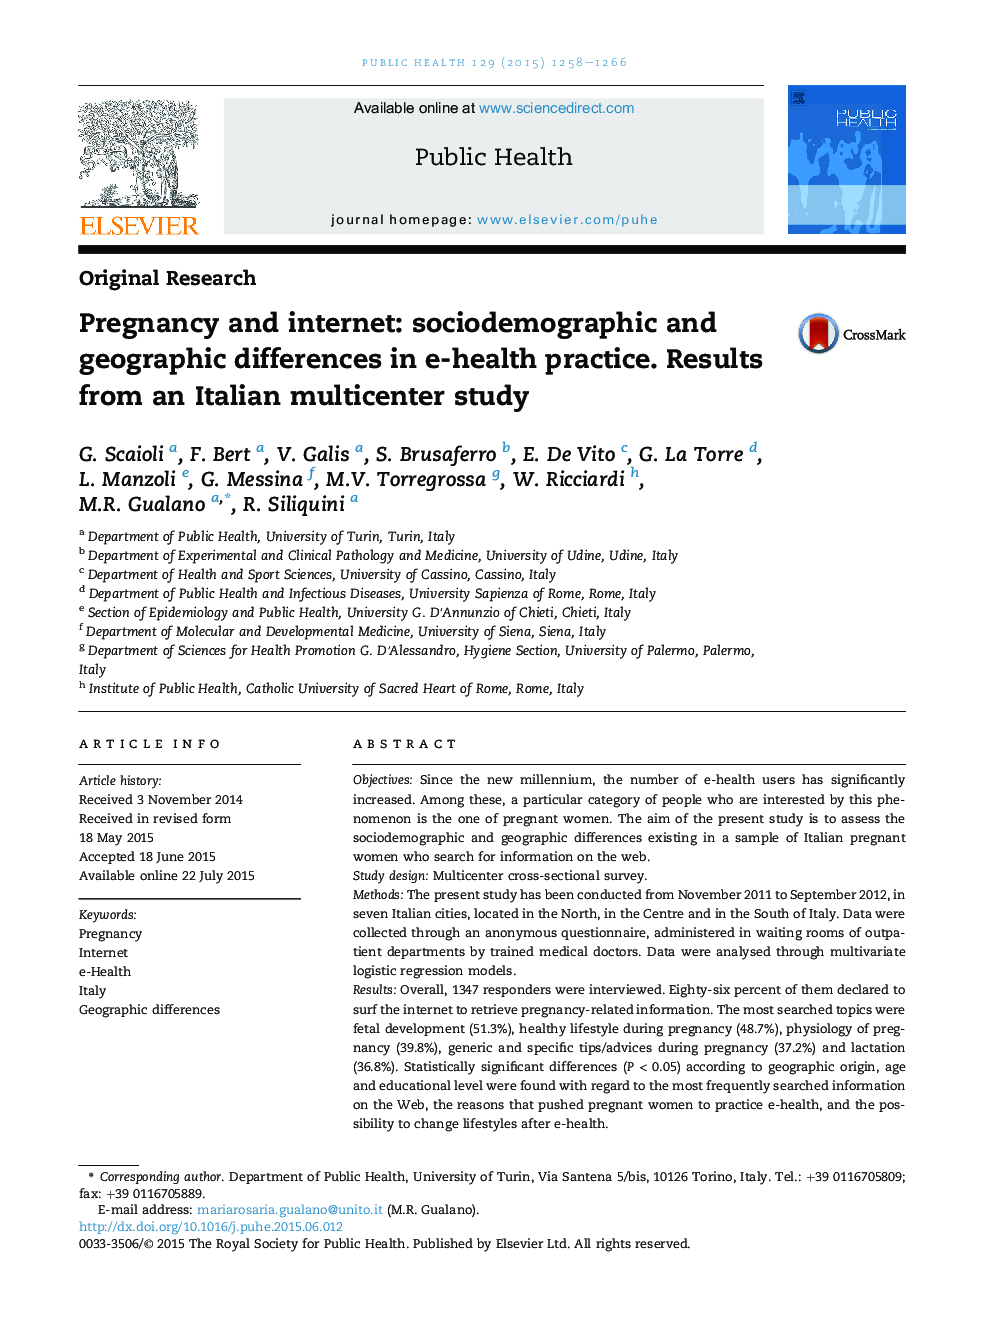 Pregnancy and internet: sociodemographic and geographic differences in e-health practice. Results from an Italian multicenter study